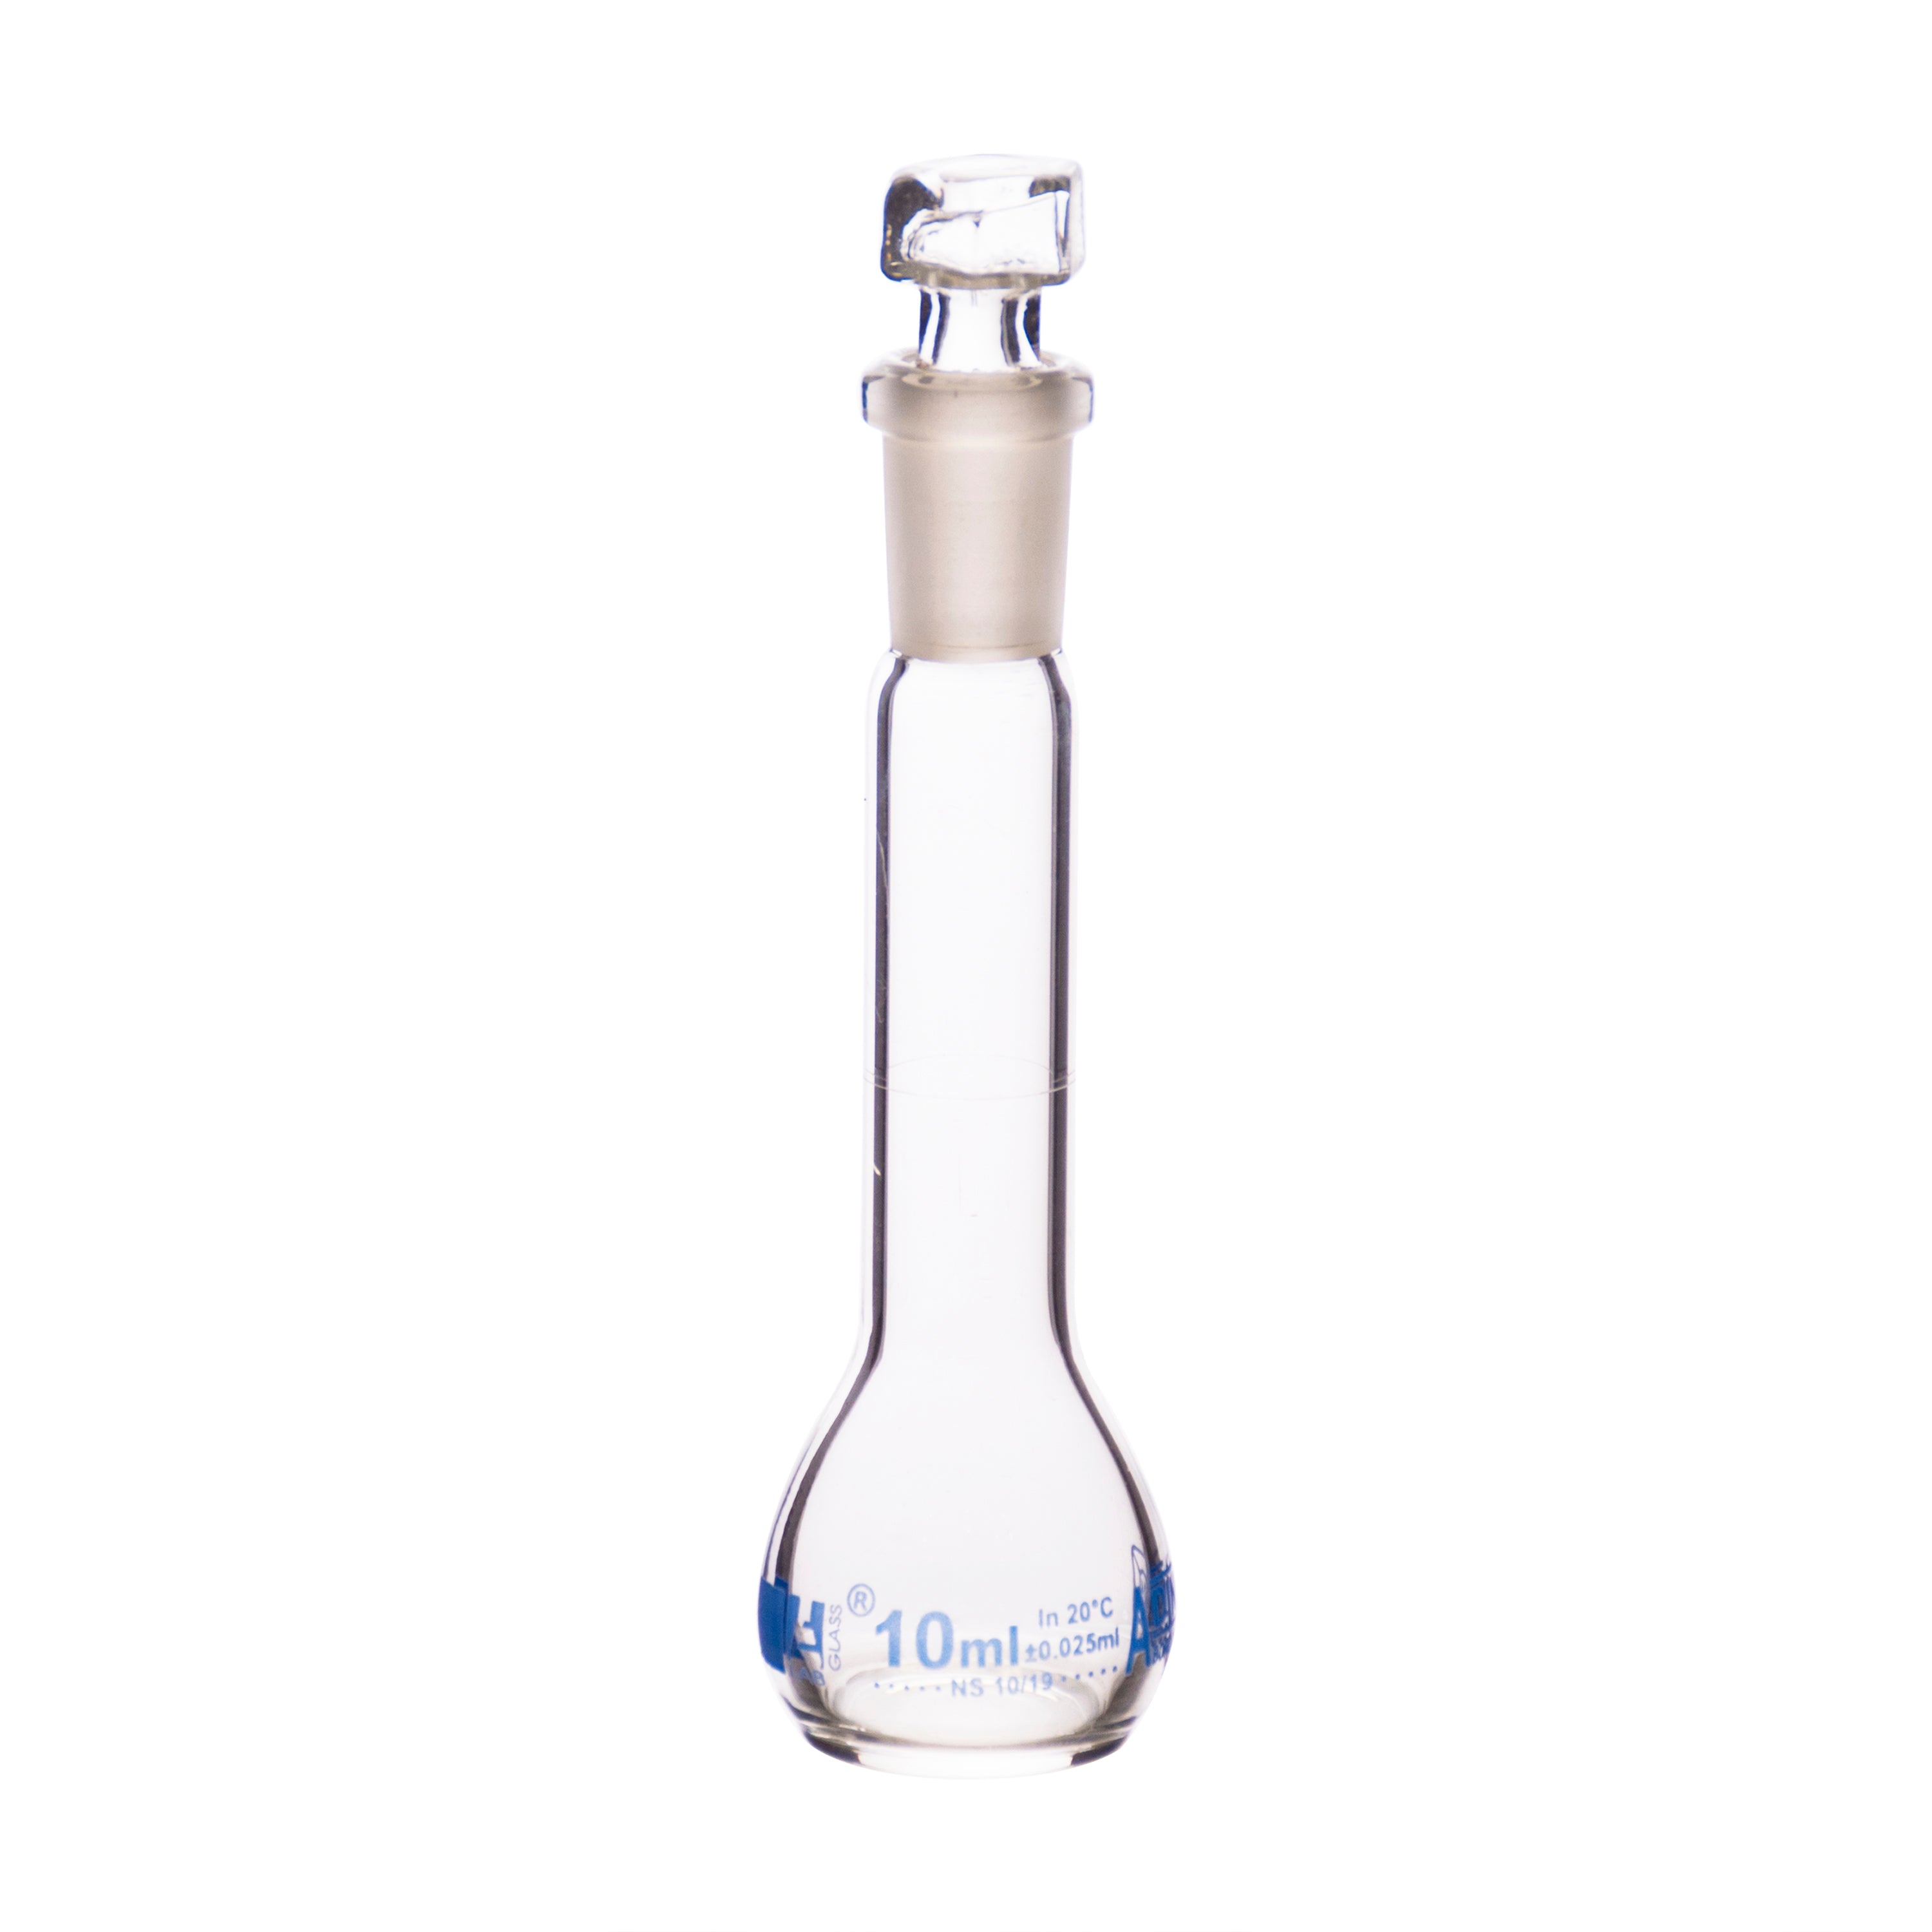 Borosilicate Volumetric Flask with Hollow Glass Stopper, 10ml, Class A, Blue Print, Autoclavable